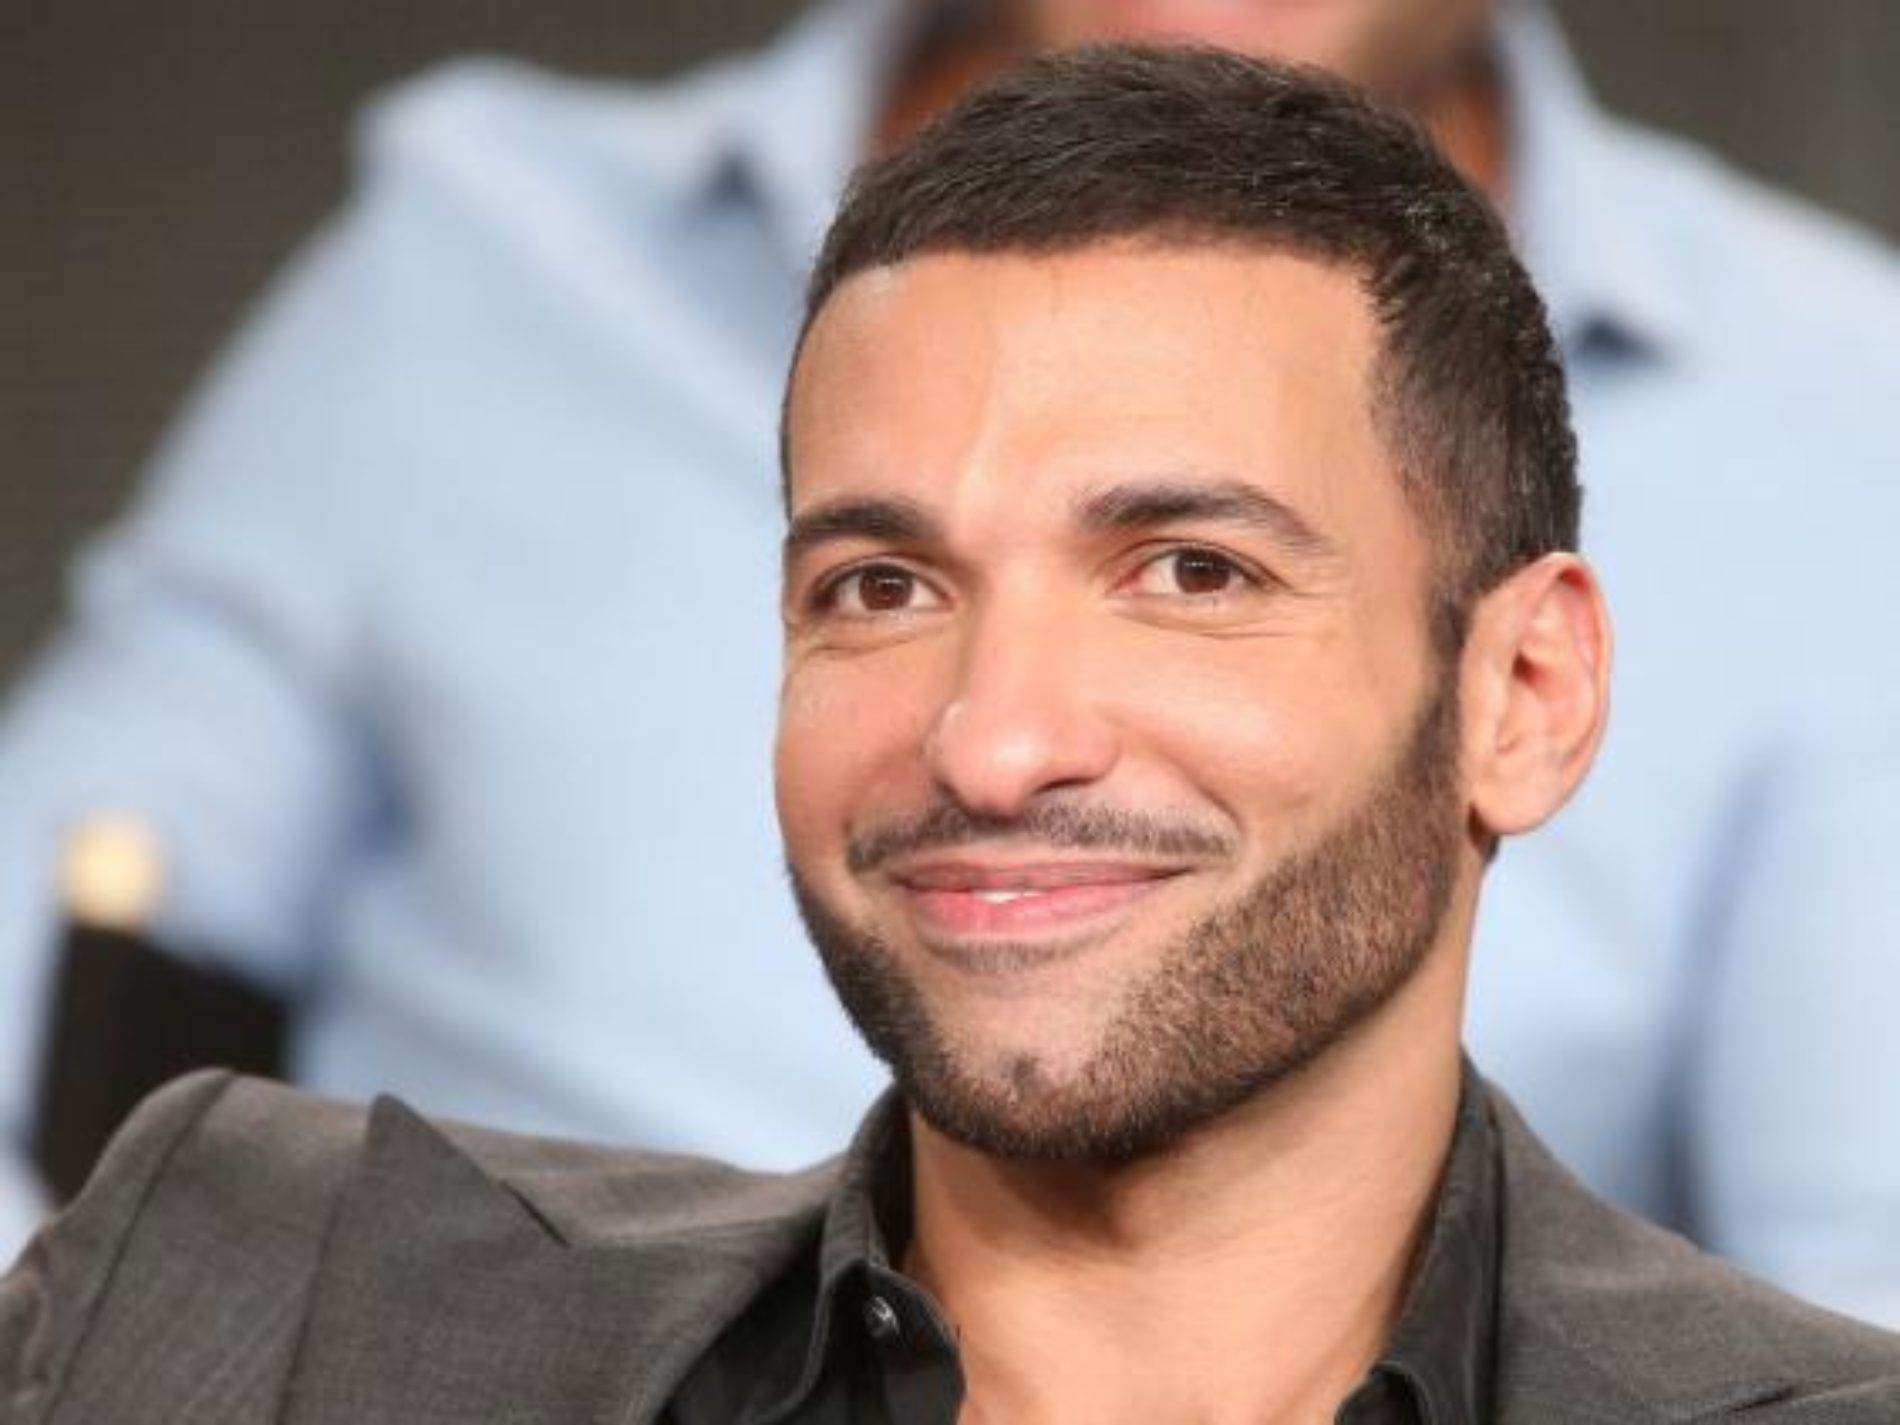 The Reporter Whose Interview Caused Haaz Sleiman To Lie About His Sexuality Responds